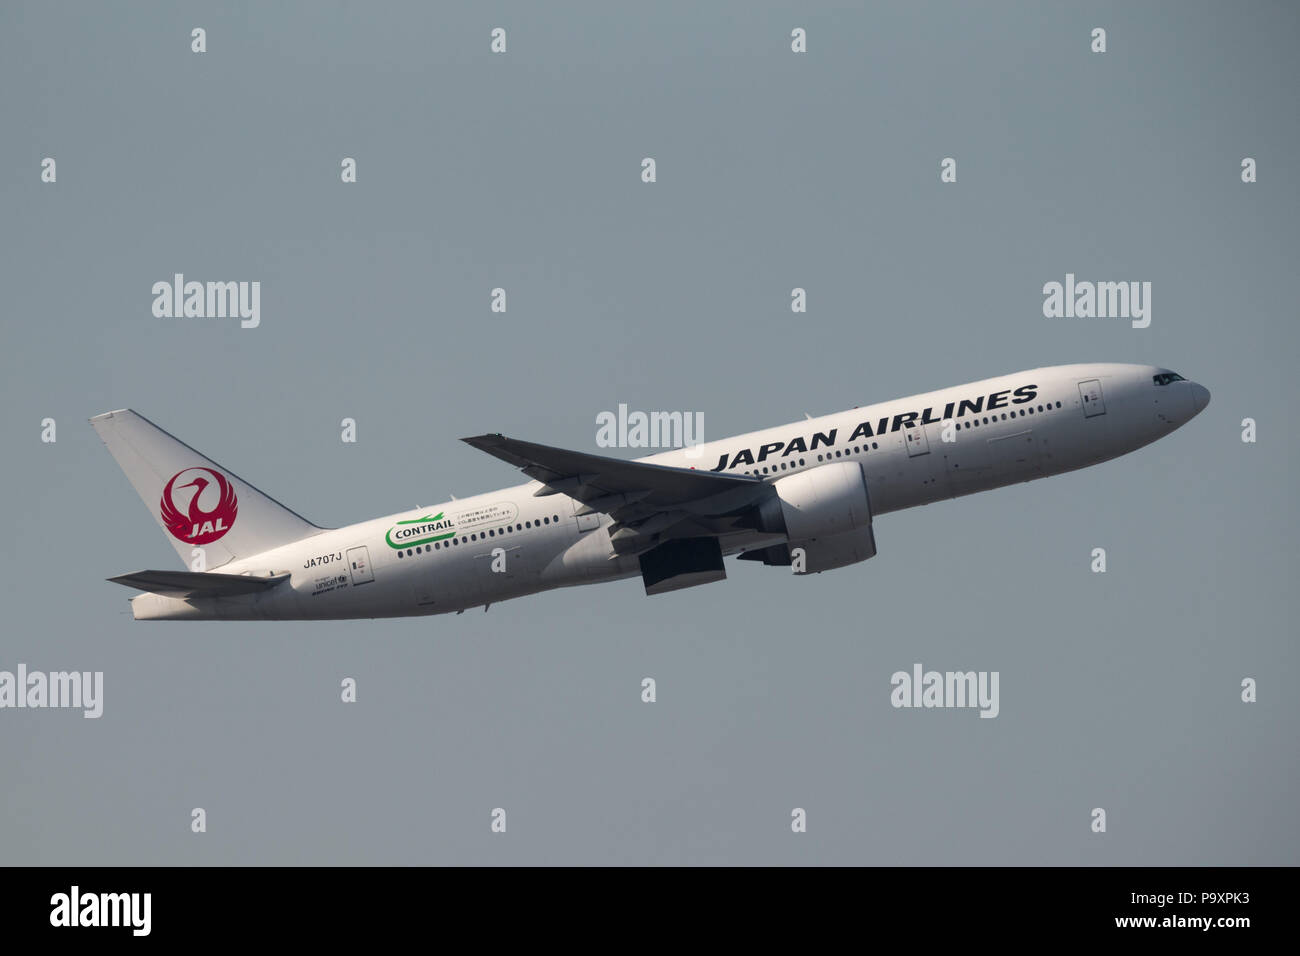 The Boeing 777-200 widebody civil jet airplane of JAL - Japan Airlines in the air after departing Hong Kong International Airport, China Stock Photo